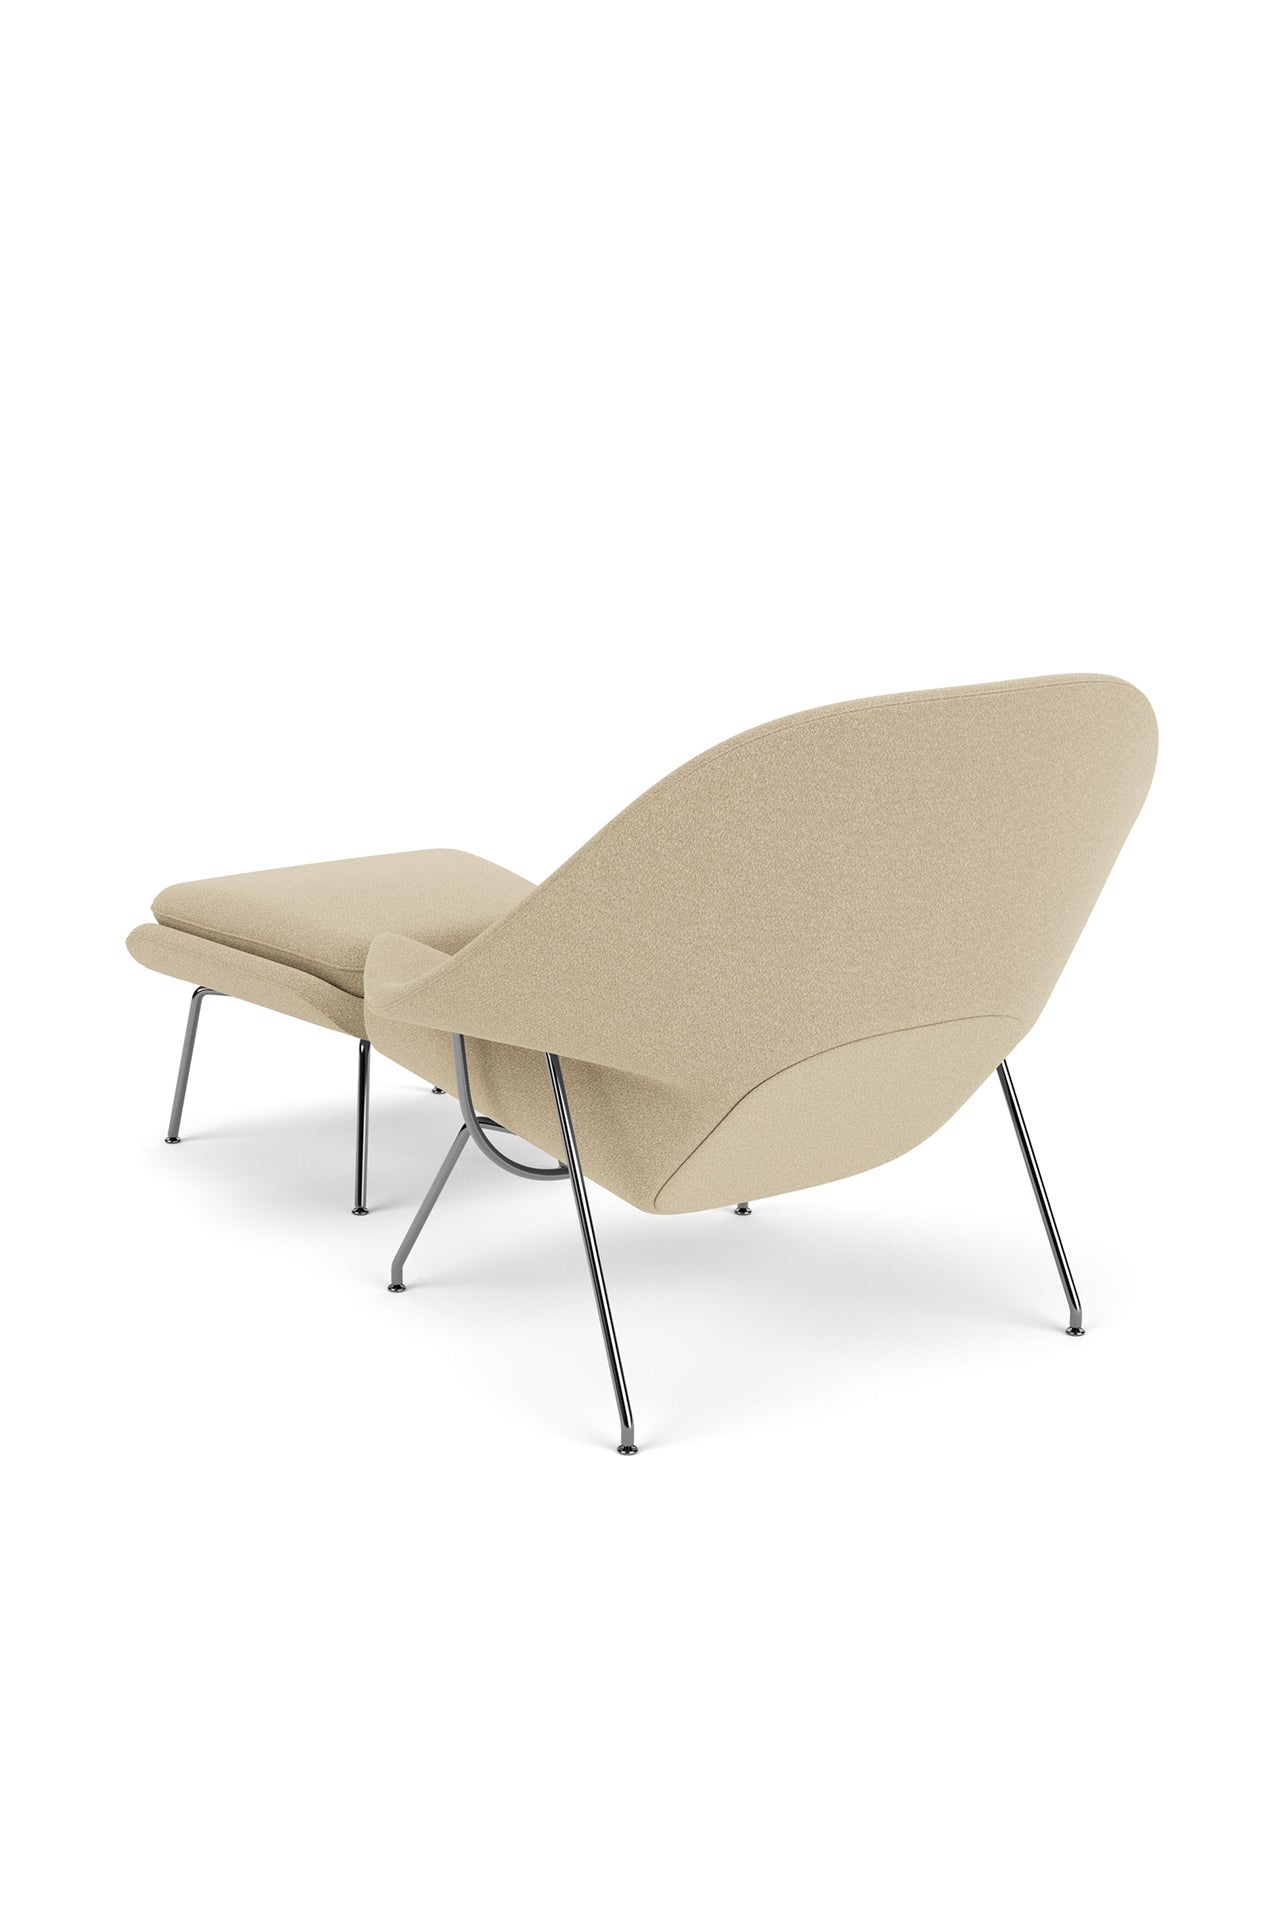 Knoll Womb Chair With Ottoman Designed By Eero Saarinen in Neutral Tan - Back Image (6606269907059)